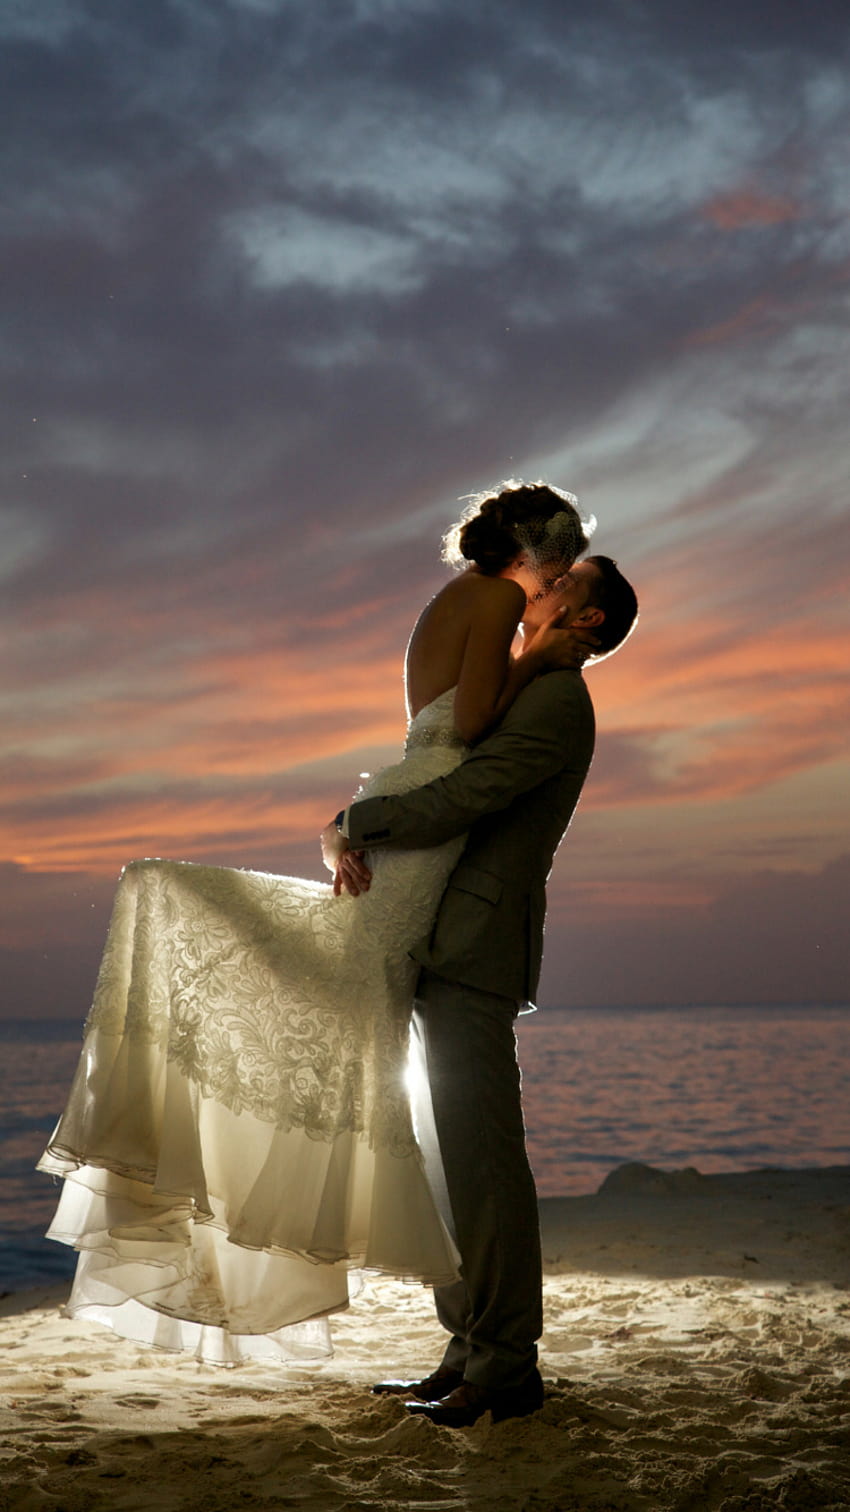 Wedding Day For Your Phone, wedding in sunset HD phone wallpaper